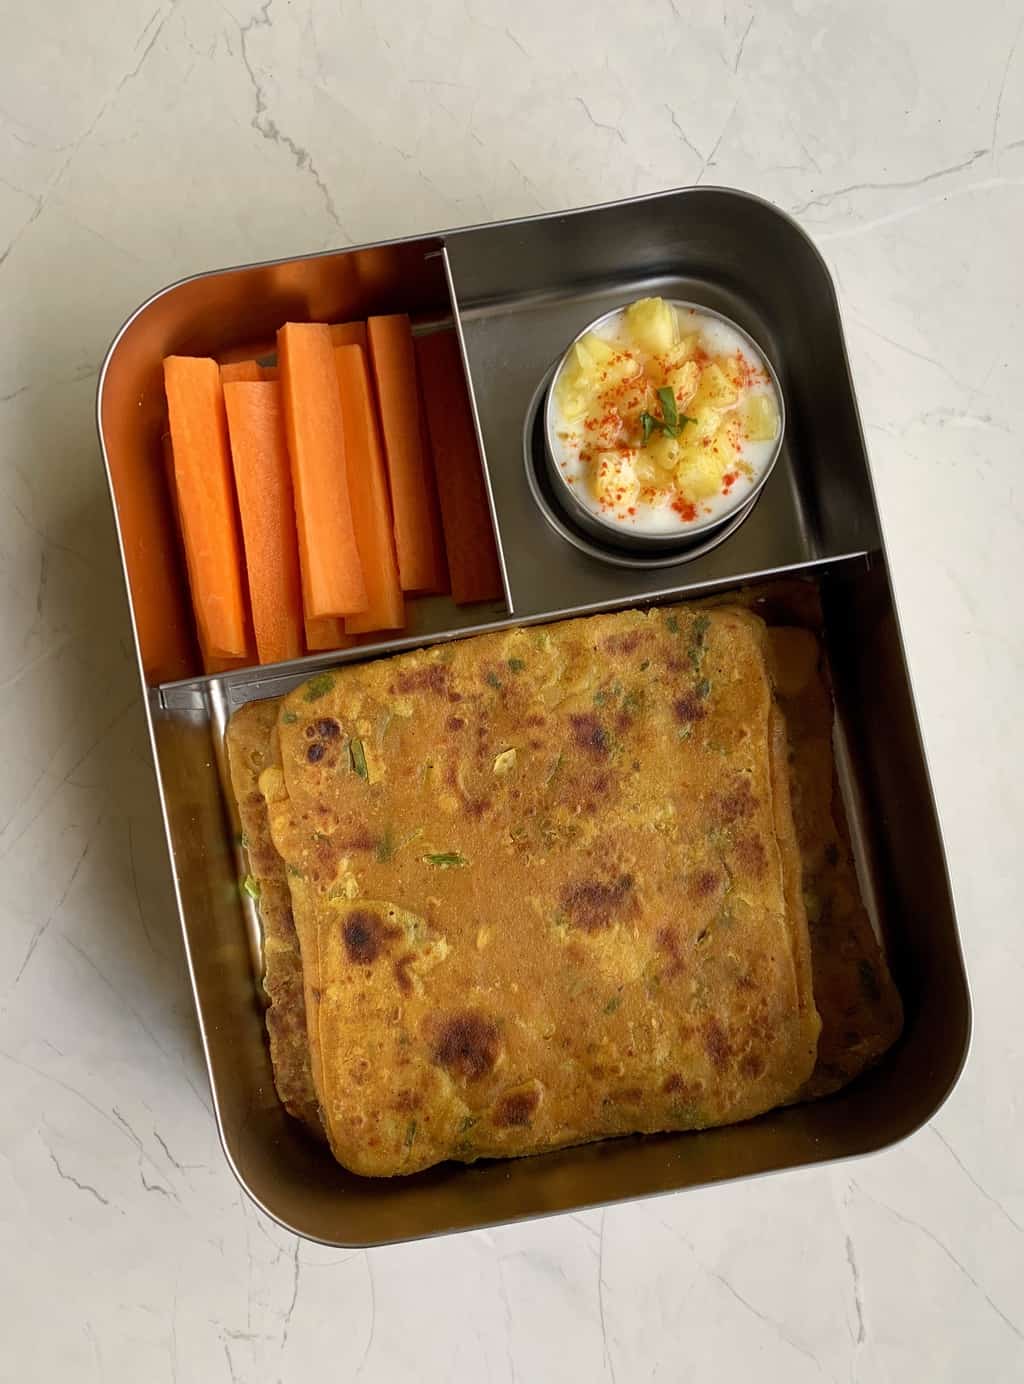 Dal Paratha + Pineapple Raita + Carrot Sticks|Protein rich lunch box recipe that can be made under 20 minutes|indianveggiedelight.com